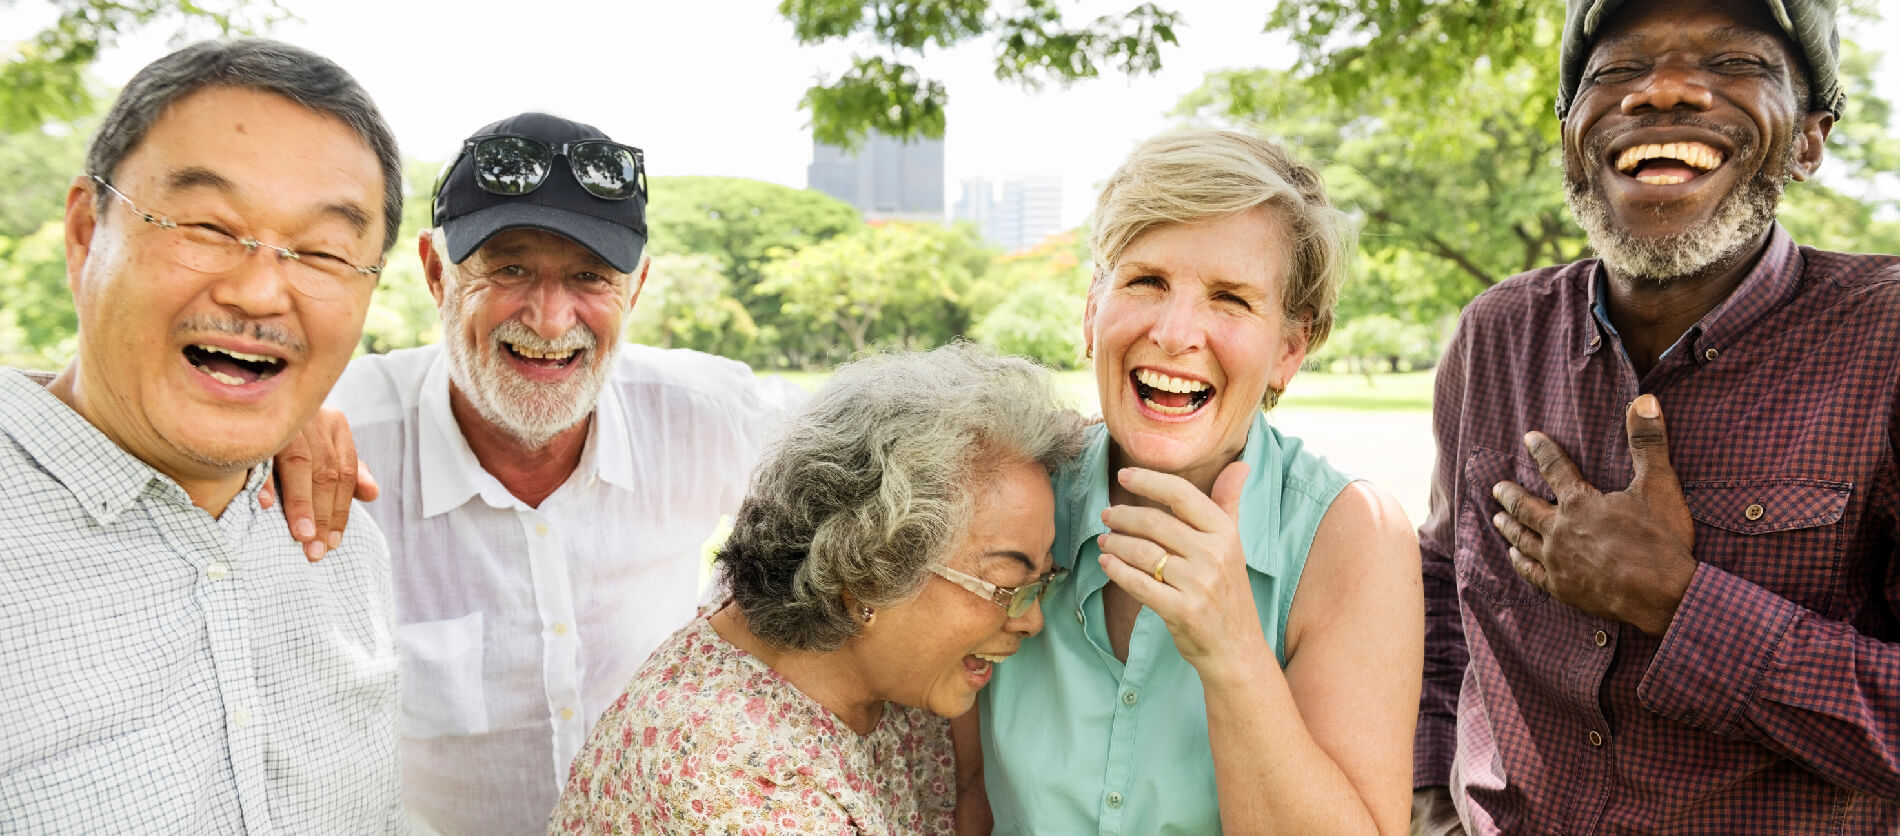 Five older adults laughing in an outdoor park area.